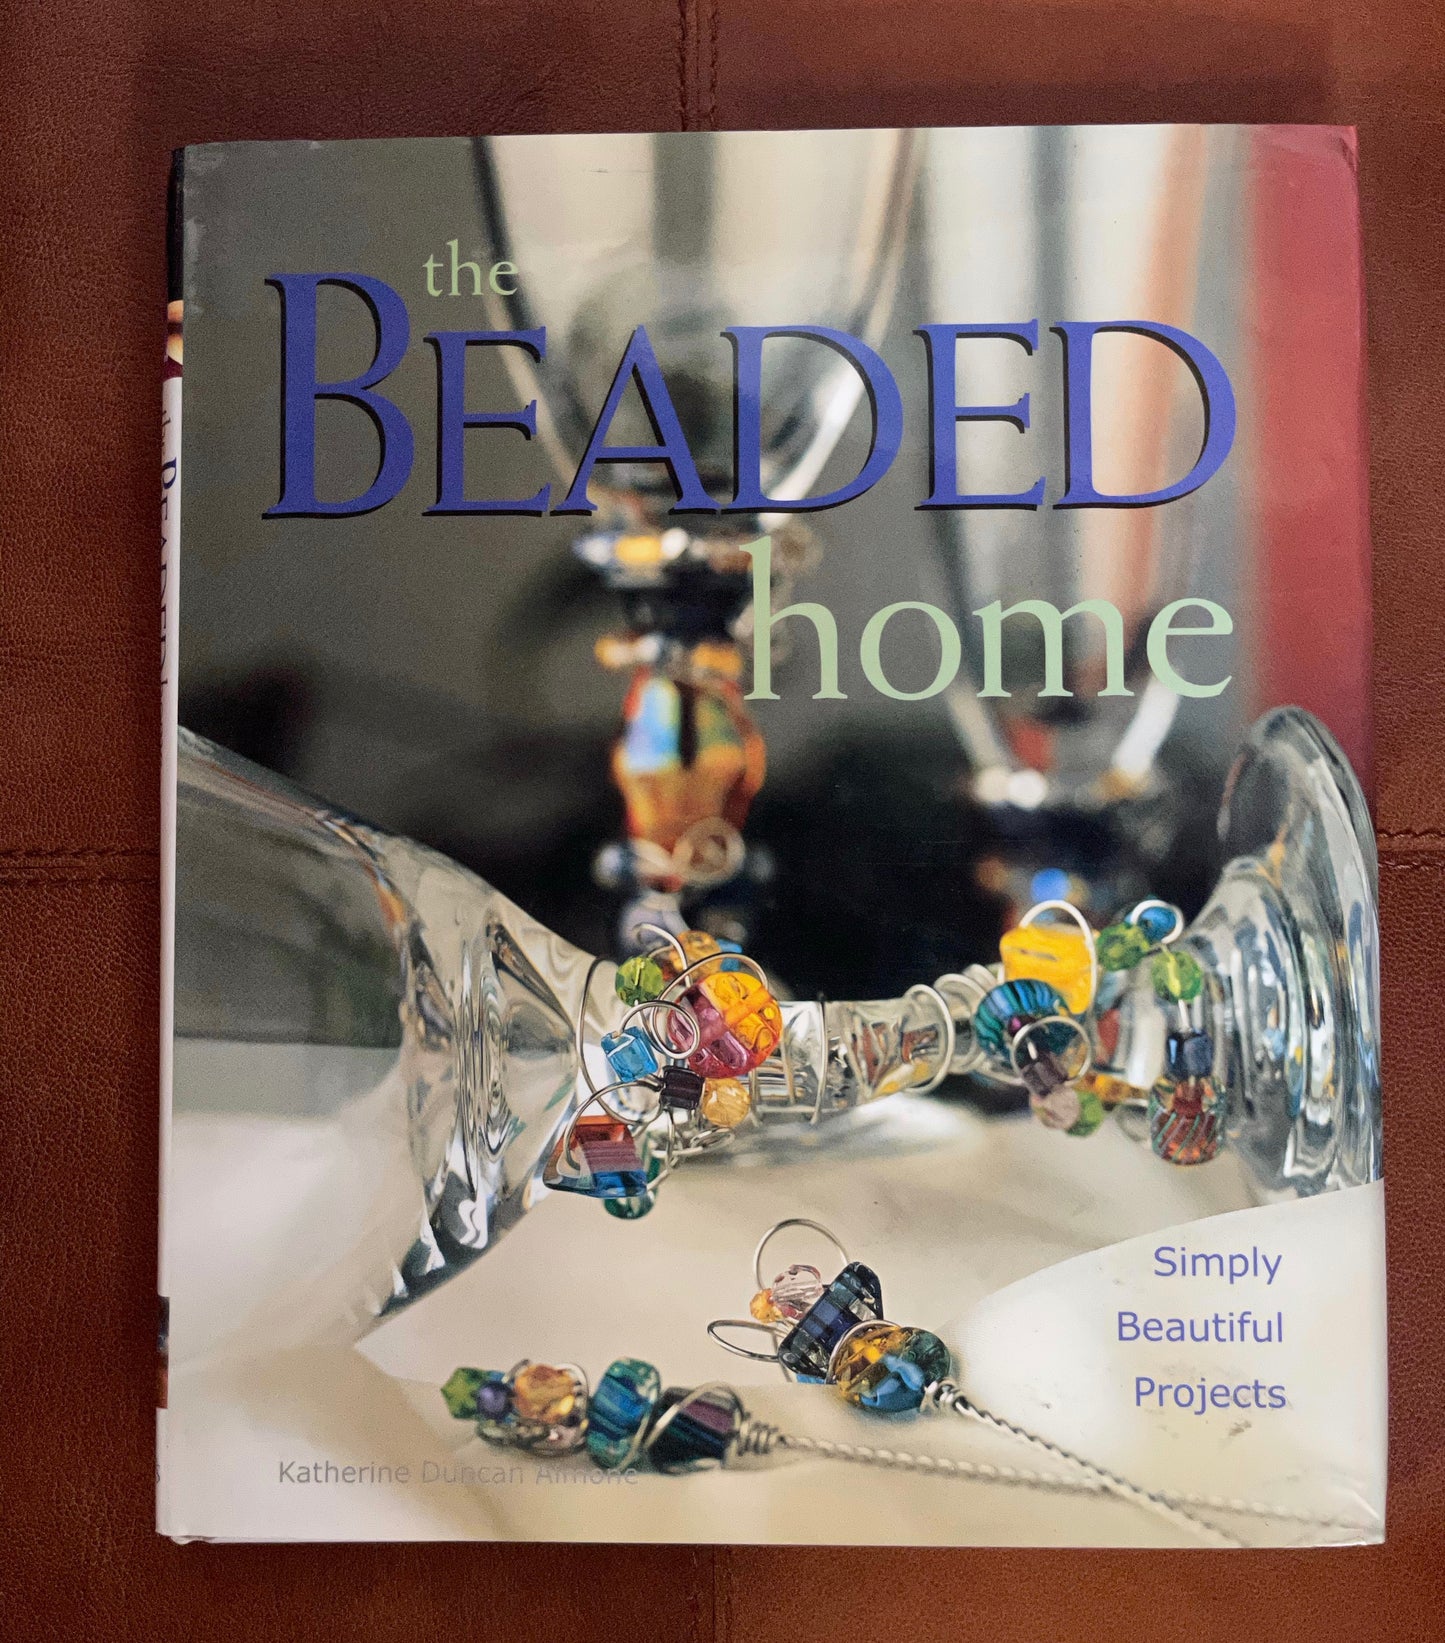 The Beaded Home, Bodhi Books and Magazines